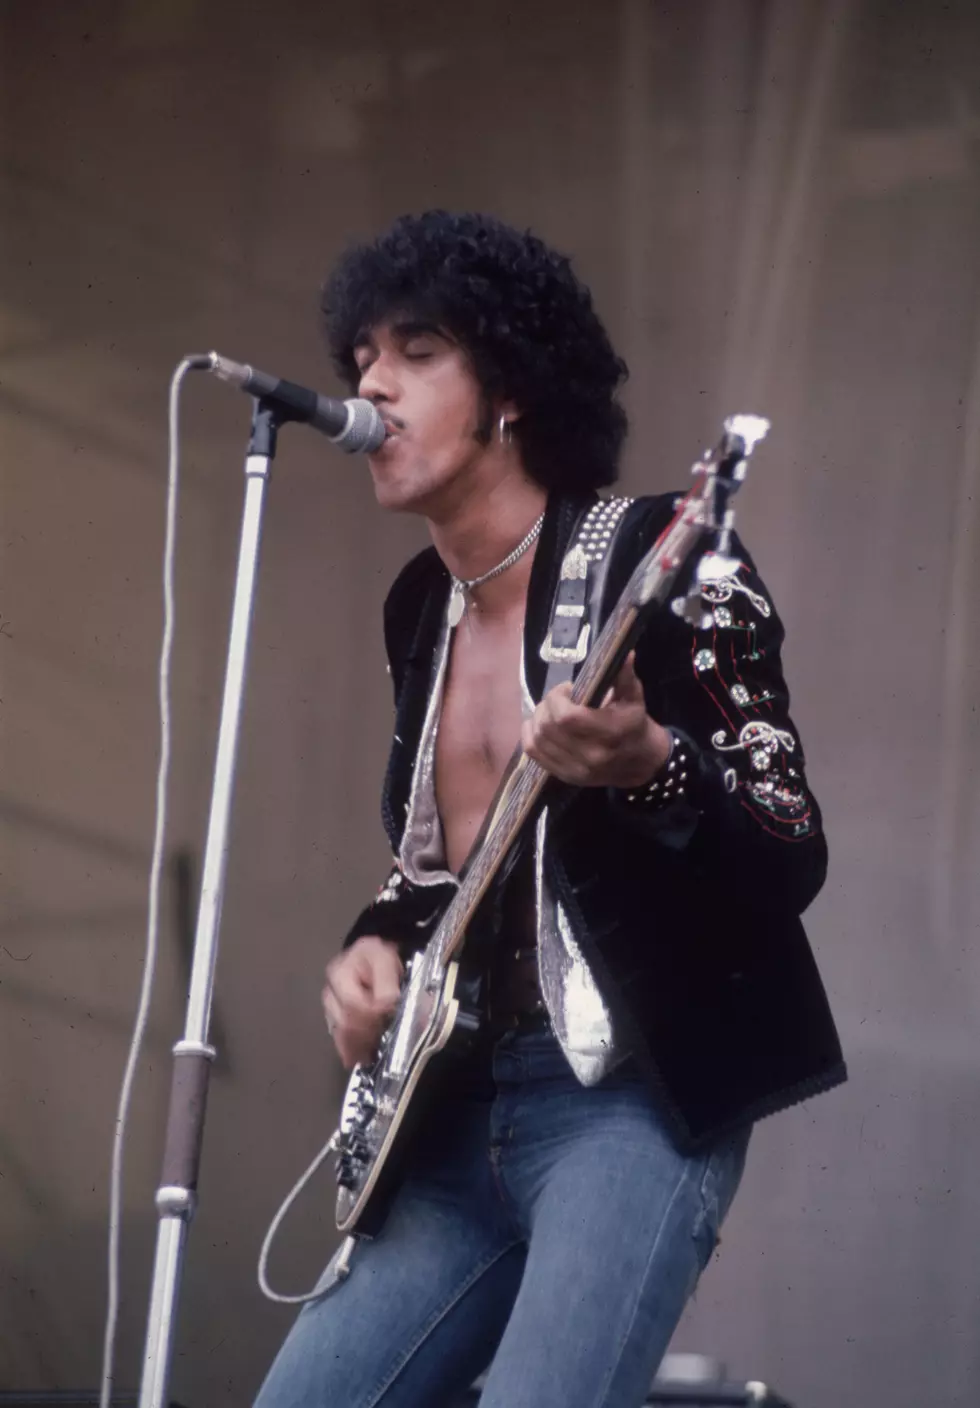 Record Replay- Thin Lizzy “Cowboy Song” [VIDEO]